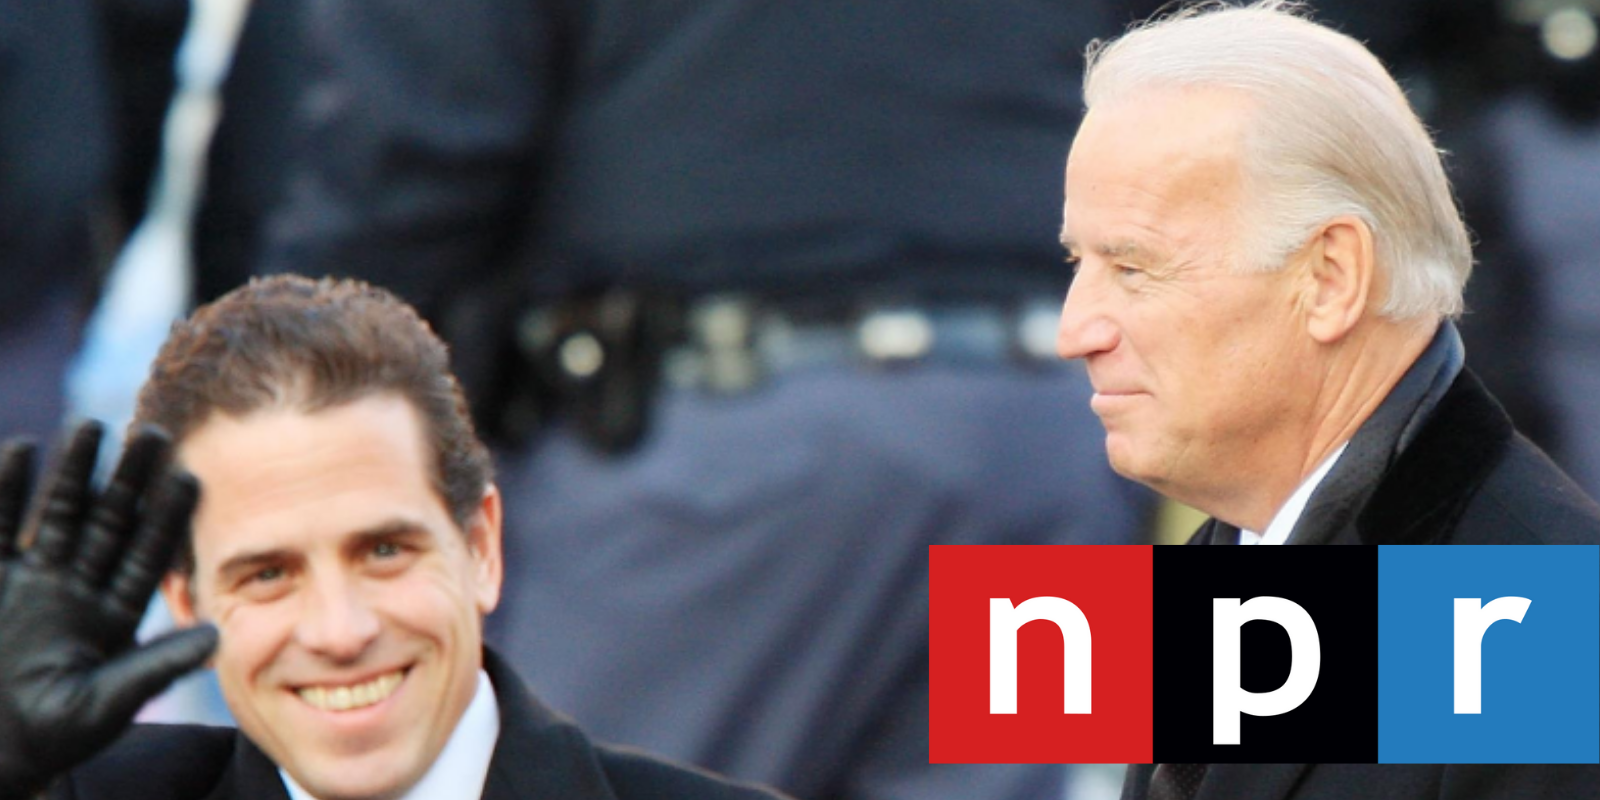 State-funded NPR refuses to cover Hunter Biden story, calling it a 'waste of time'